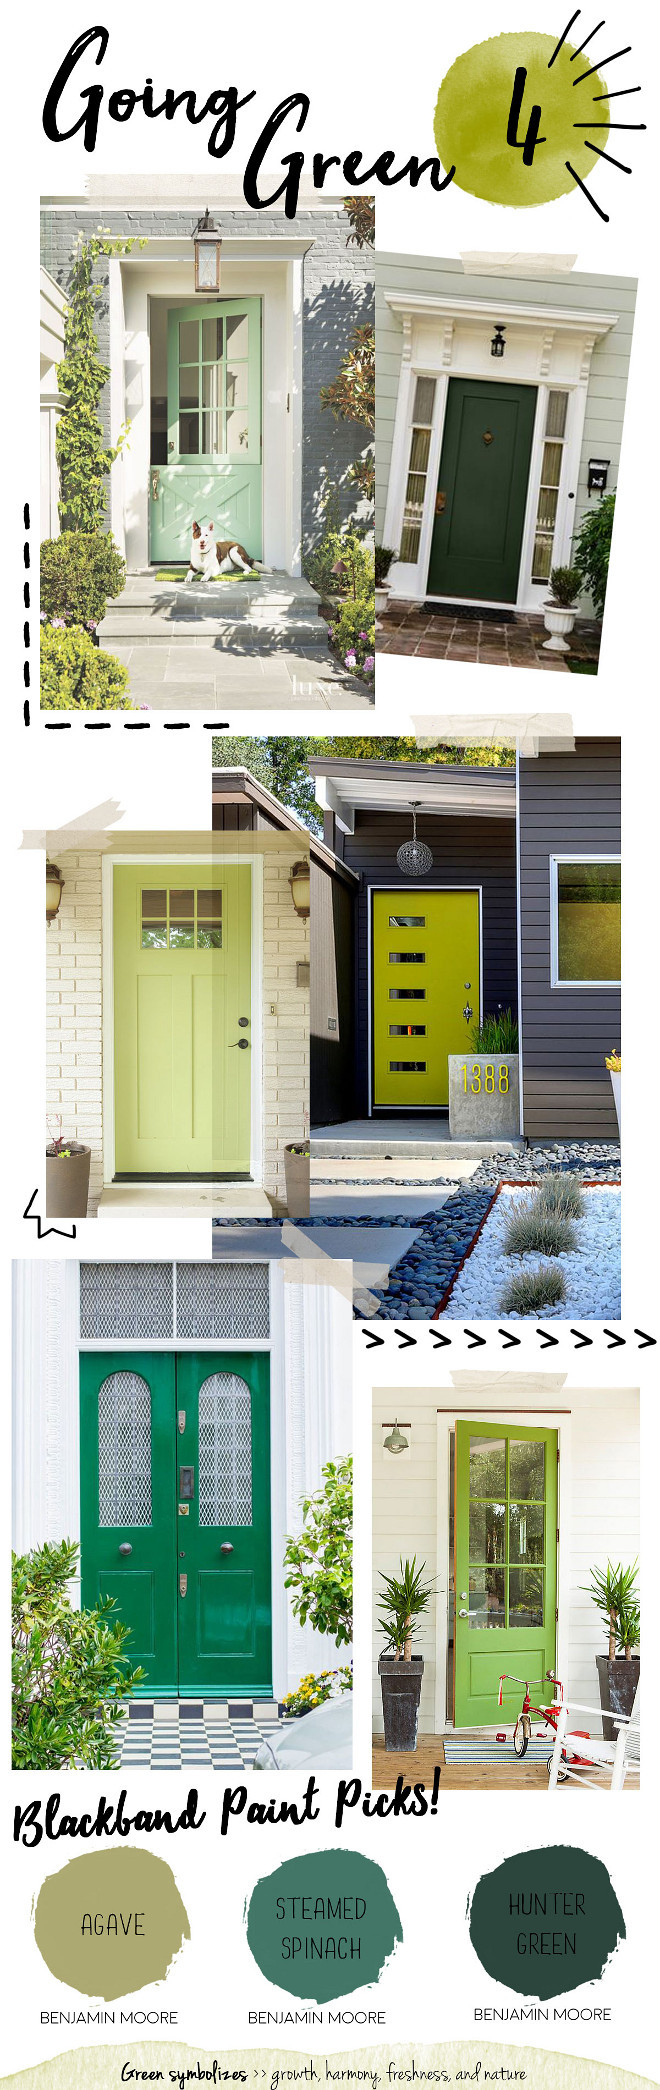 Green Door Paint Color ideas. Green Front Door Paint Color. Benjamin Moore Agave. Benjamin Moore Steamed Spinach. Benjamin Moore Hunter Green. The color green has great healing power and it is the most restful color for the eyes. It’s a refreshing color with a natural balance of cool and warm undertones making it easy to pair with a variety of different home styles. #BenjaminMooreAgave #BenjaminMooreSteamedSpinach #BenjaminMooreHunterGreen